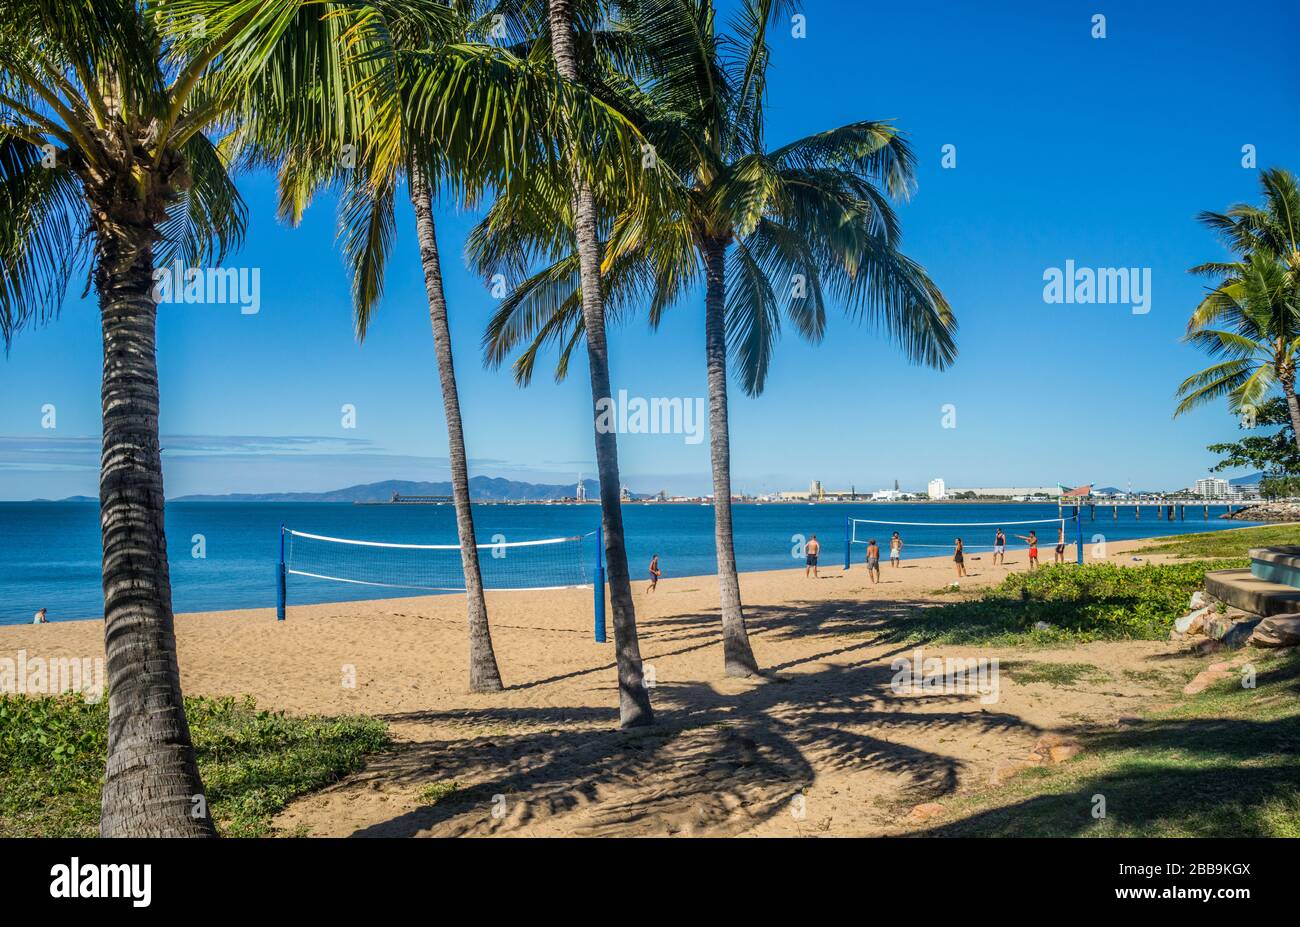 The Strand, seaside foreshore in the Townsville suburb of North Ward, Queensland, Australia Stock Photo